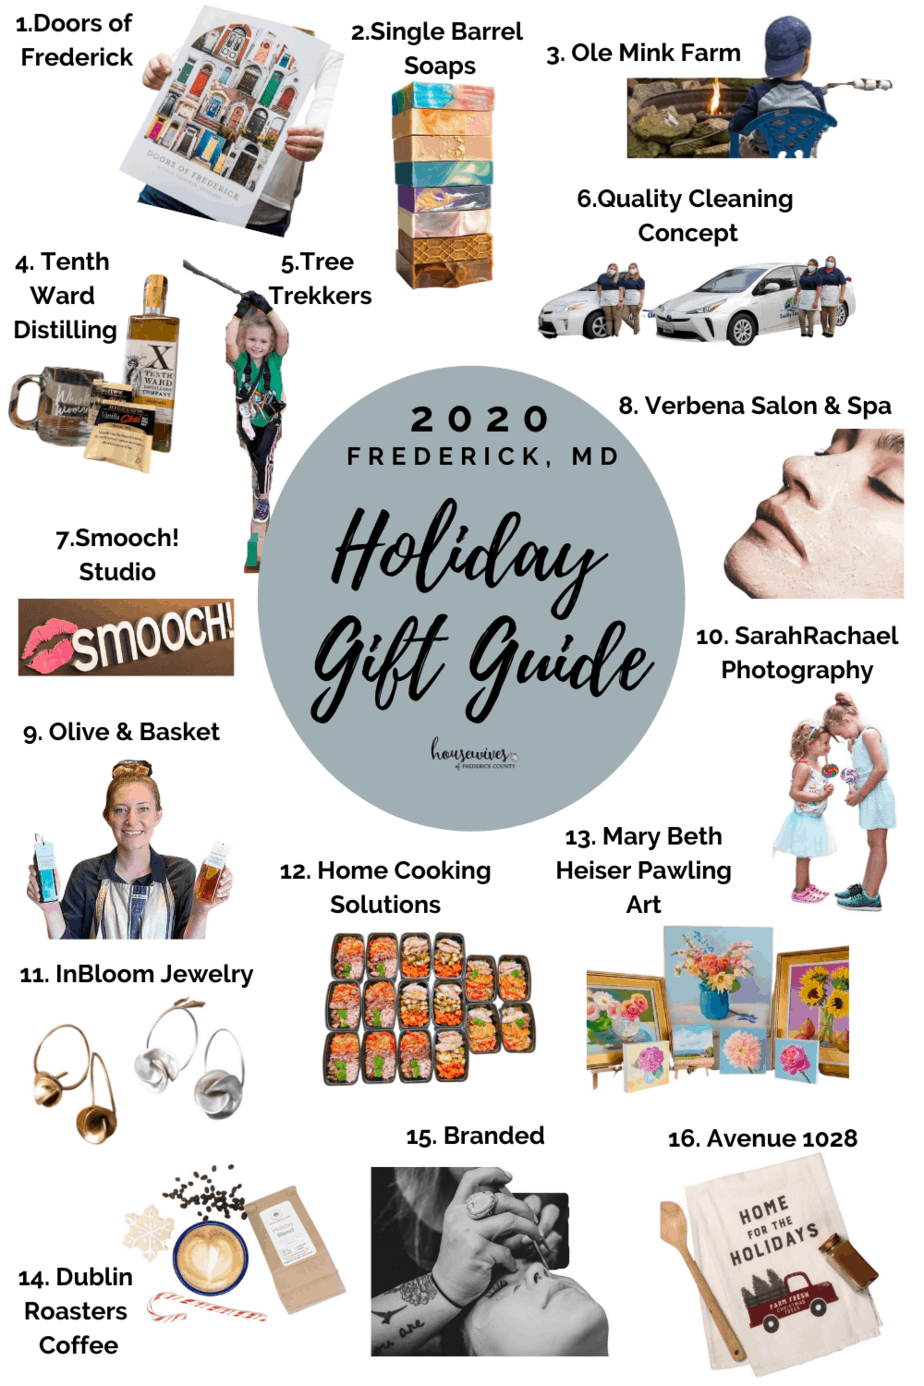 2020 Holiday Gift Guide for Frederick, Md: Something for Everyone On Your List!